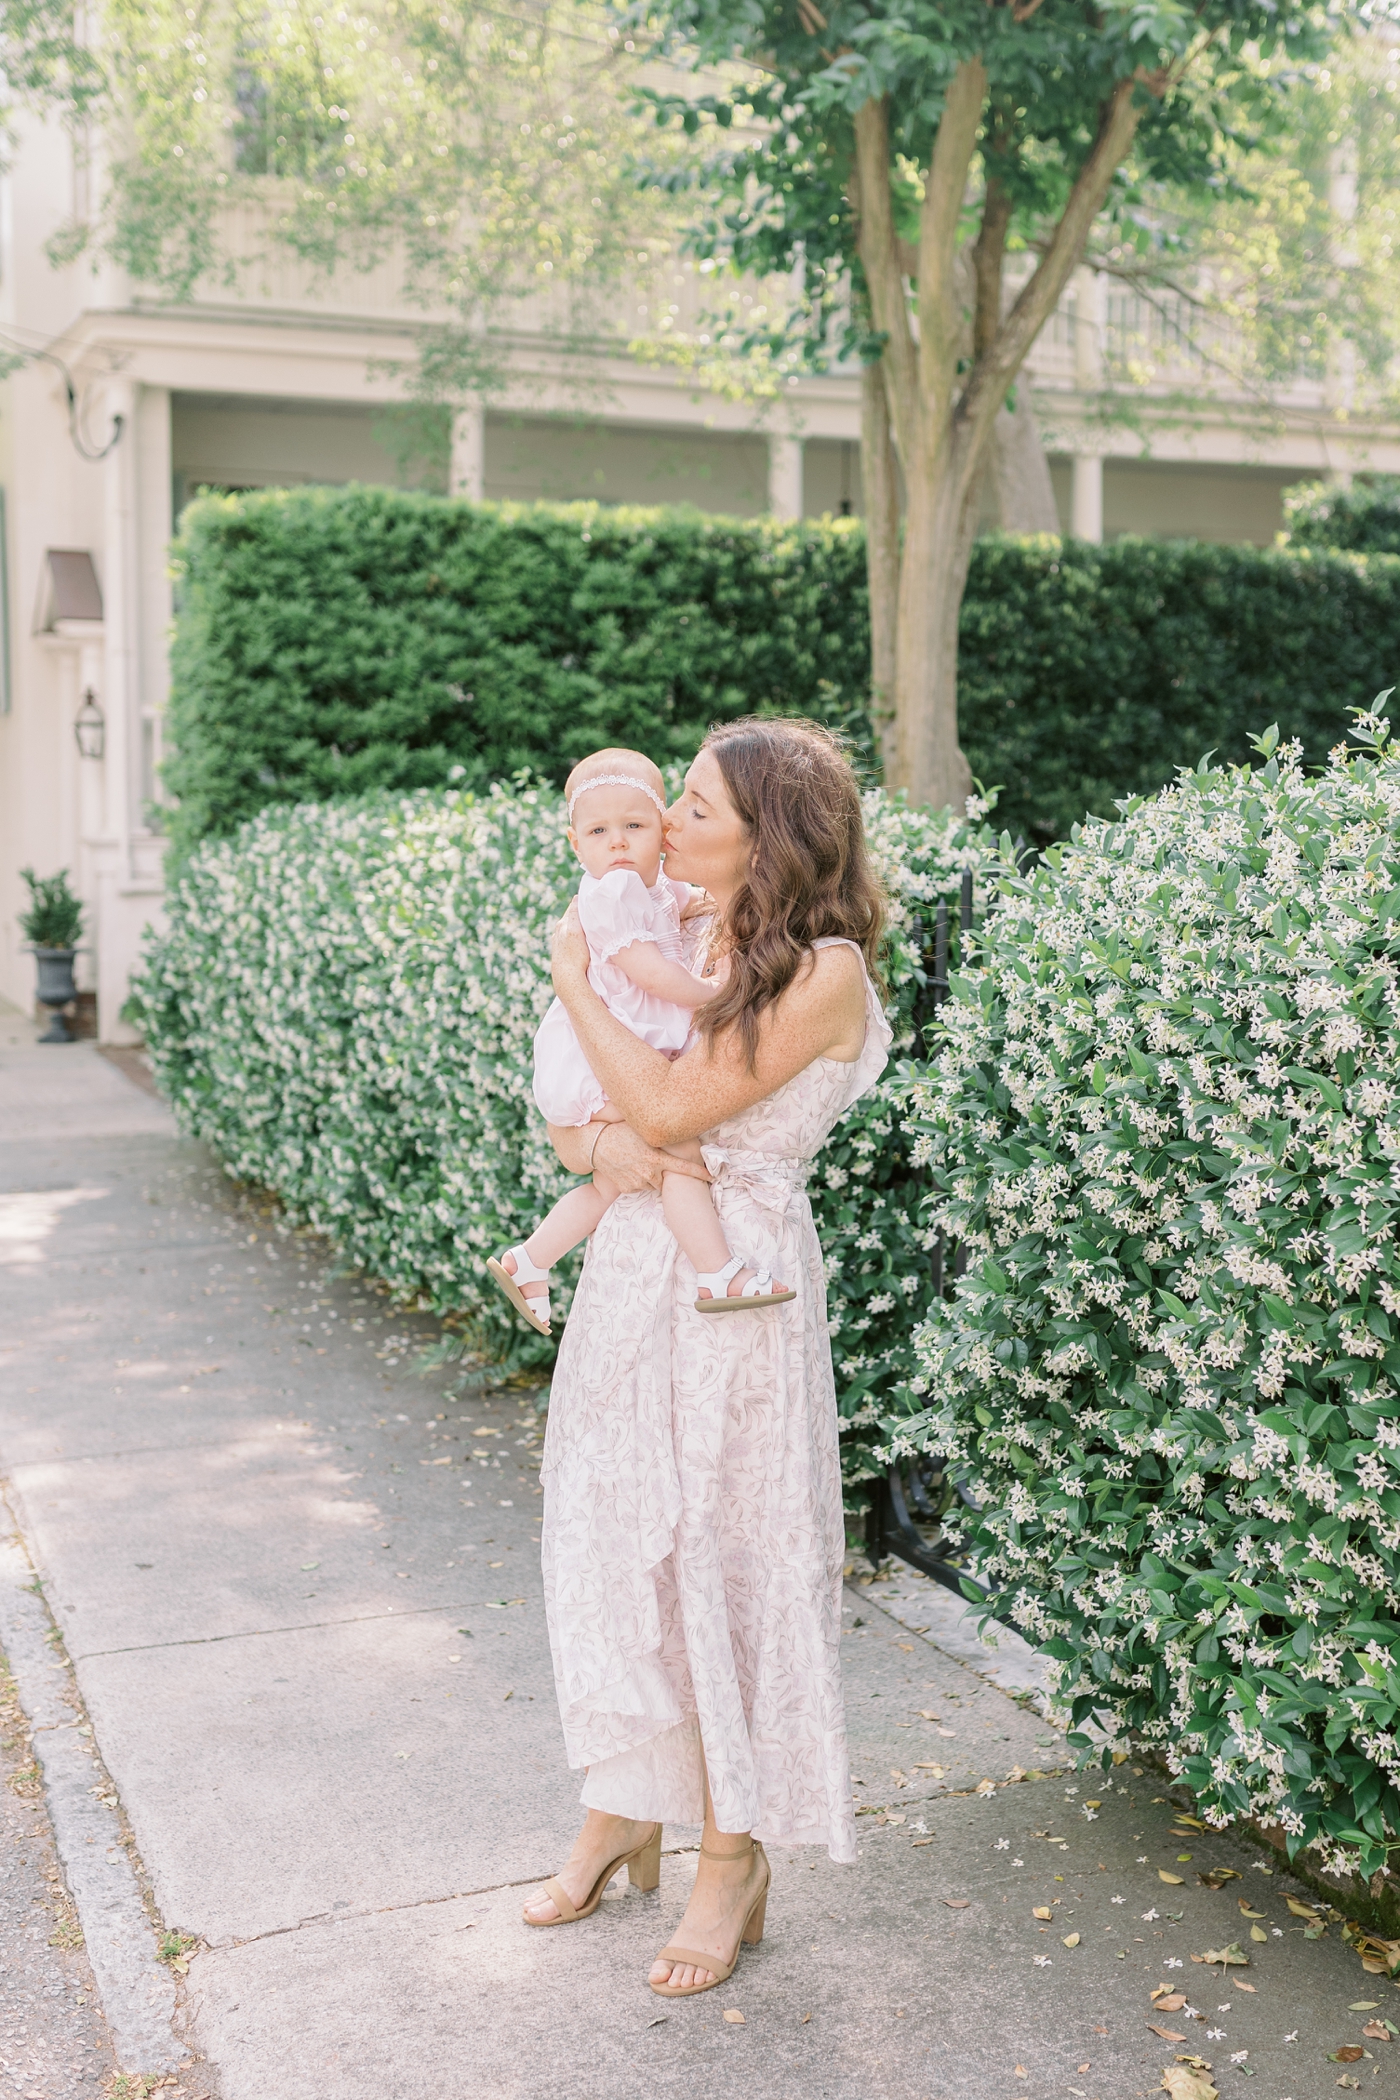 Mom kissing baby daughters cheek in front of jasmine covered sidewalk downtown charleston | Photo by Caitlyn Motycka Photography.